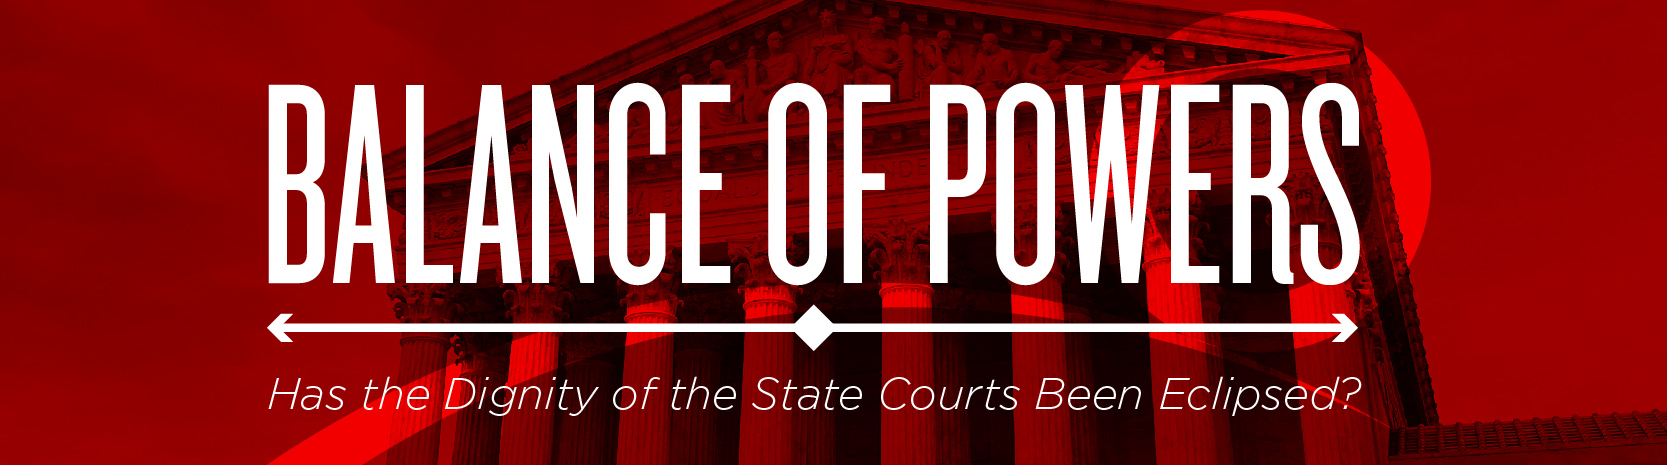 Image: Balance of Powers: Has the Dignity of the State Courts Been Eclipsed?